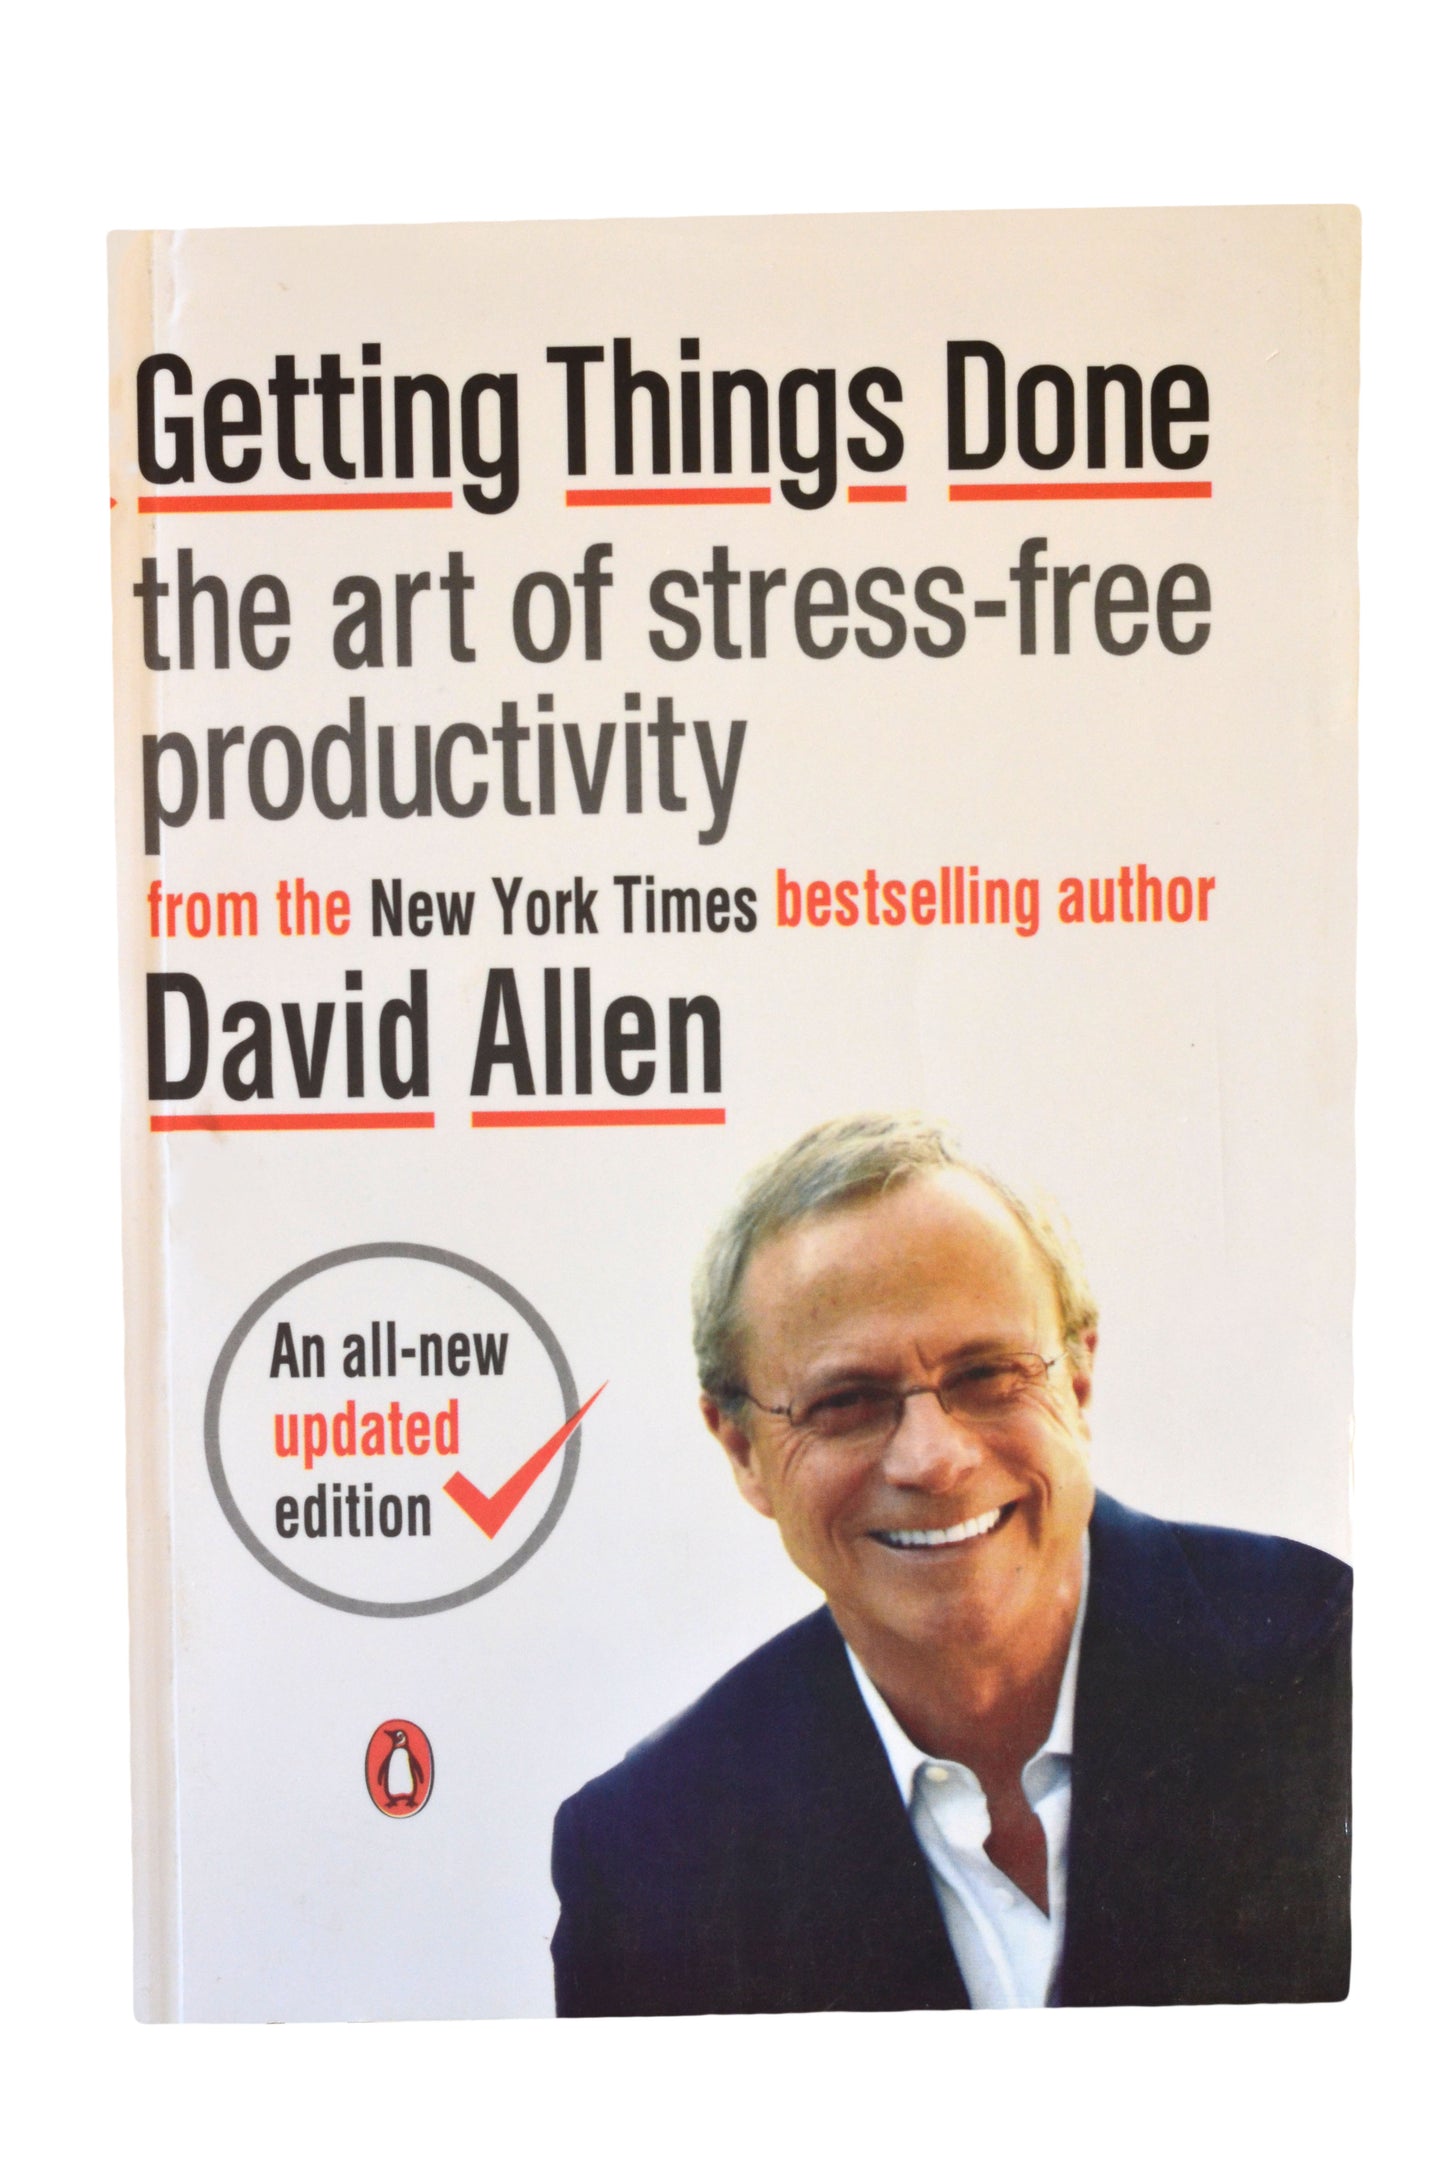 GETTING THINGS DONE by David Allen